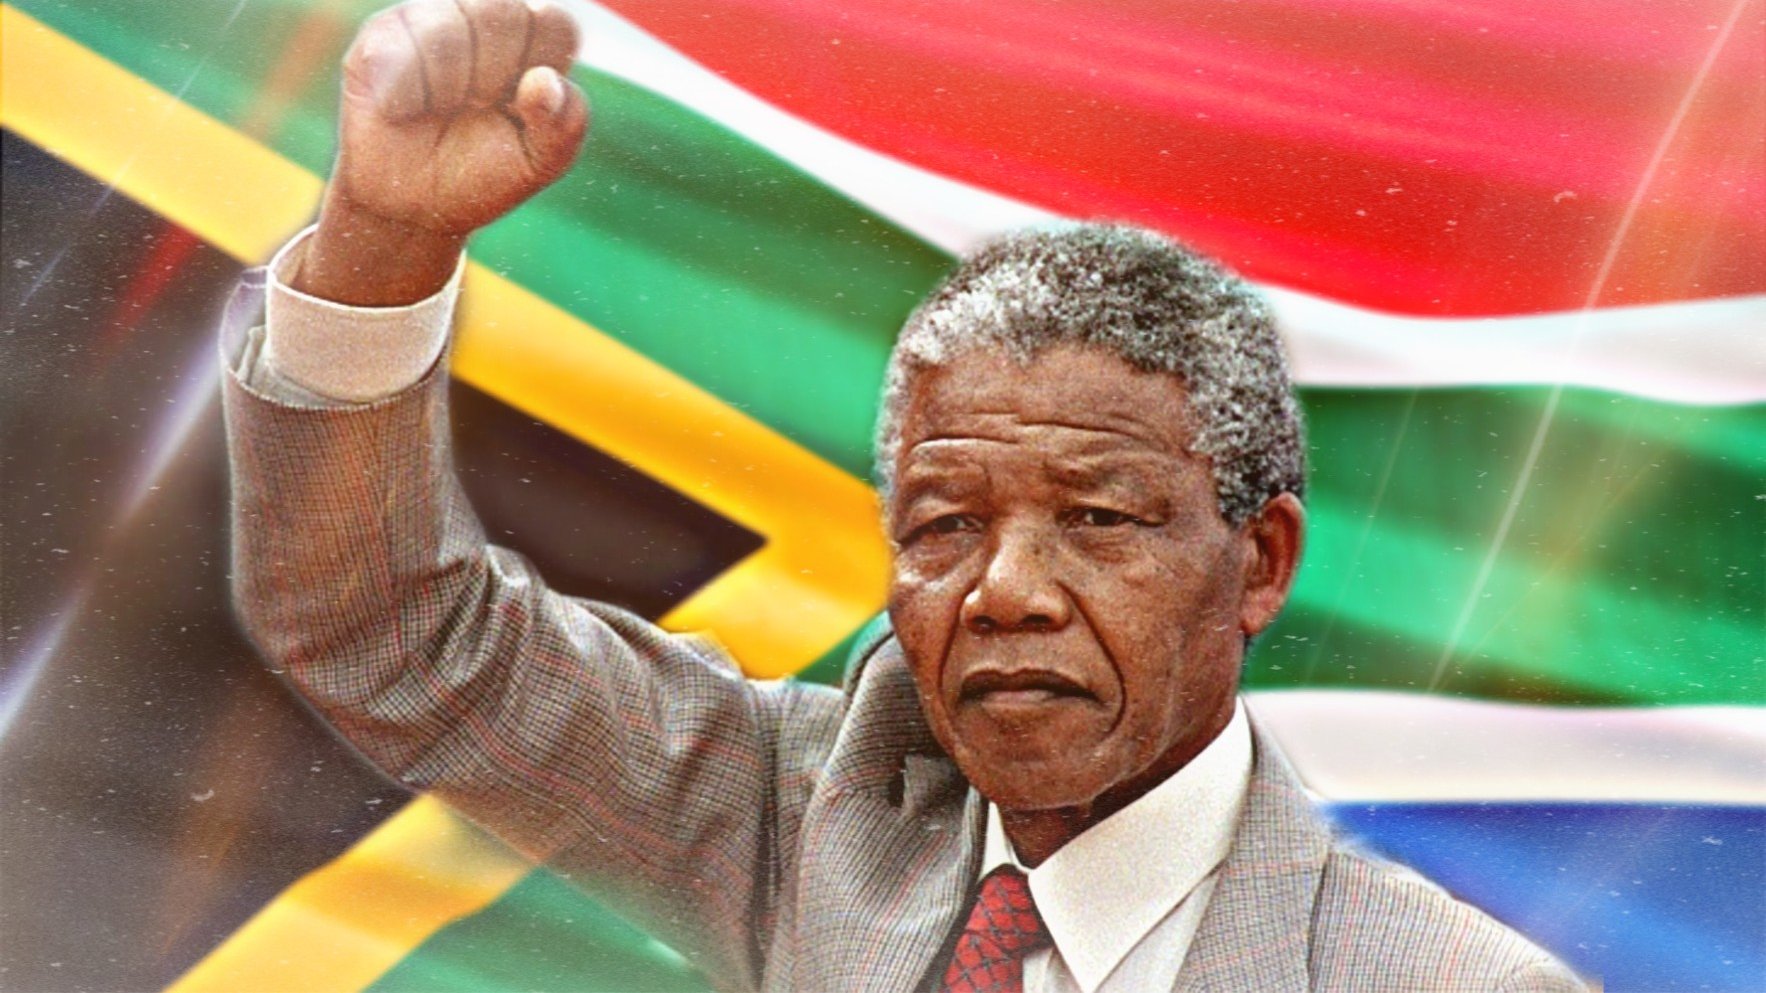 10 fun facts about Nelson Mandela